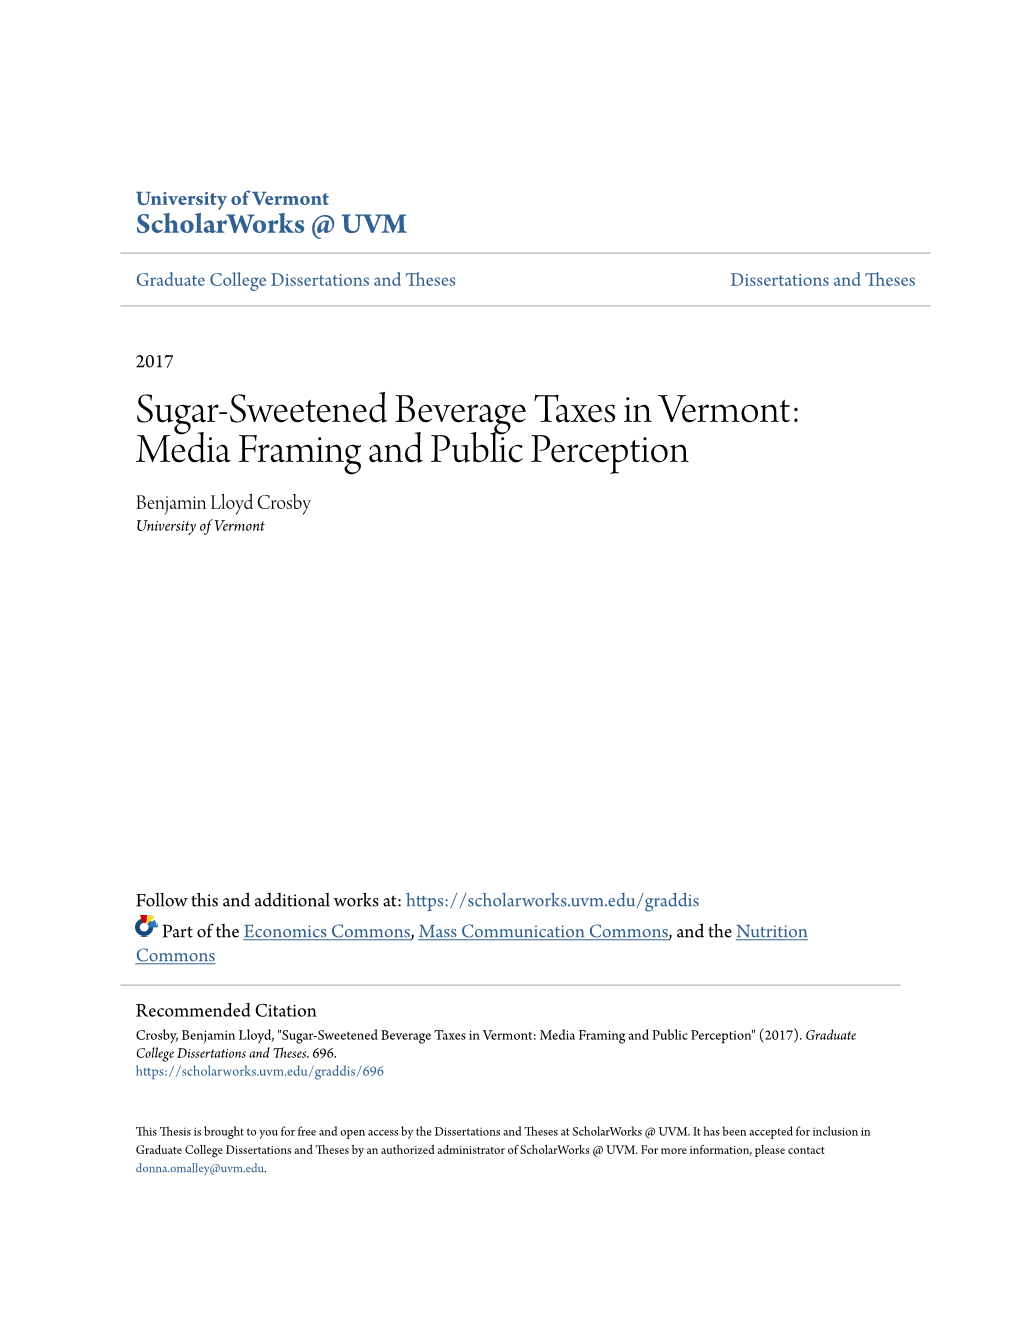 Sugar-Sweetened Beverage Taxes in Vermont: Media Framing and Public Perception Benjamin Lloyd Crosby University of Vermont